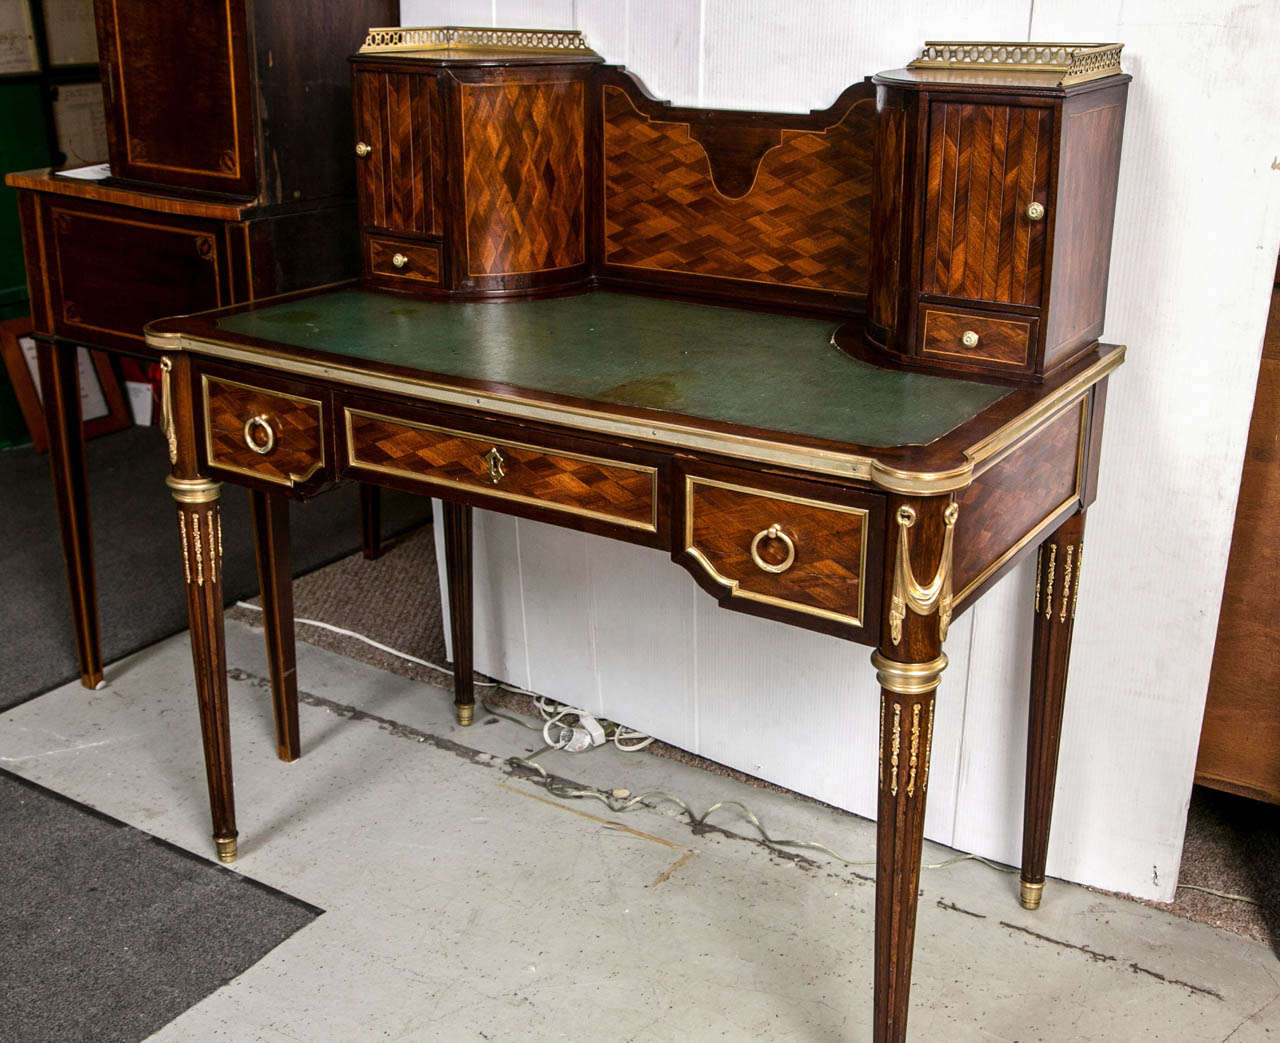 A wonderfully cast bronze mounted desk in the manner of F. Linke. The Louis XVI style legs all bronze mounted leading to a knee hole desk with all over parquetry design. The bronze framed top having a leather tooled writting surface. The top with a